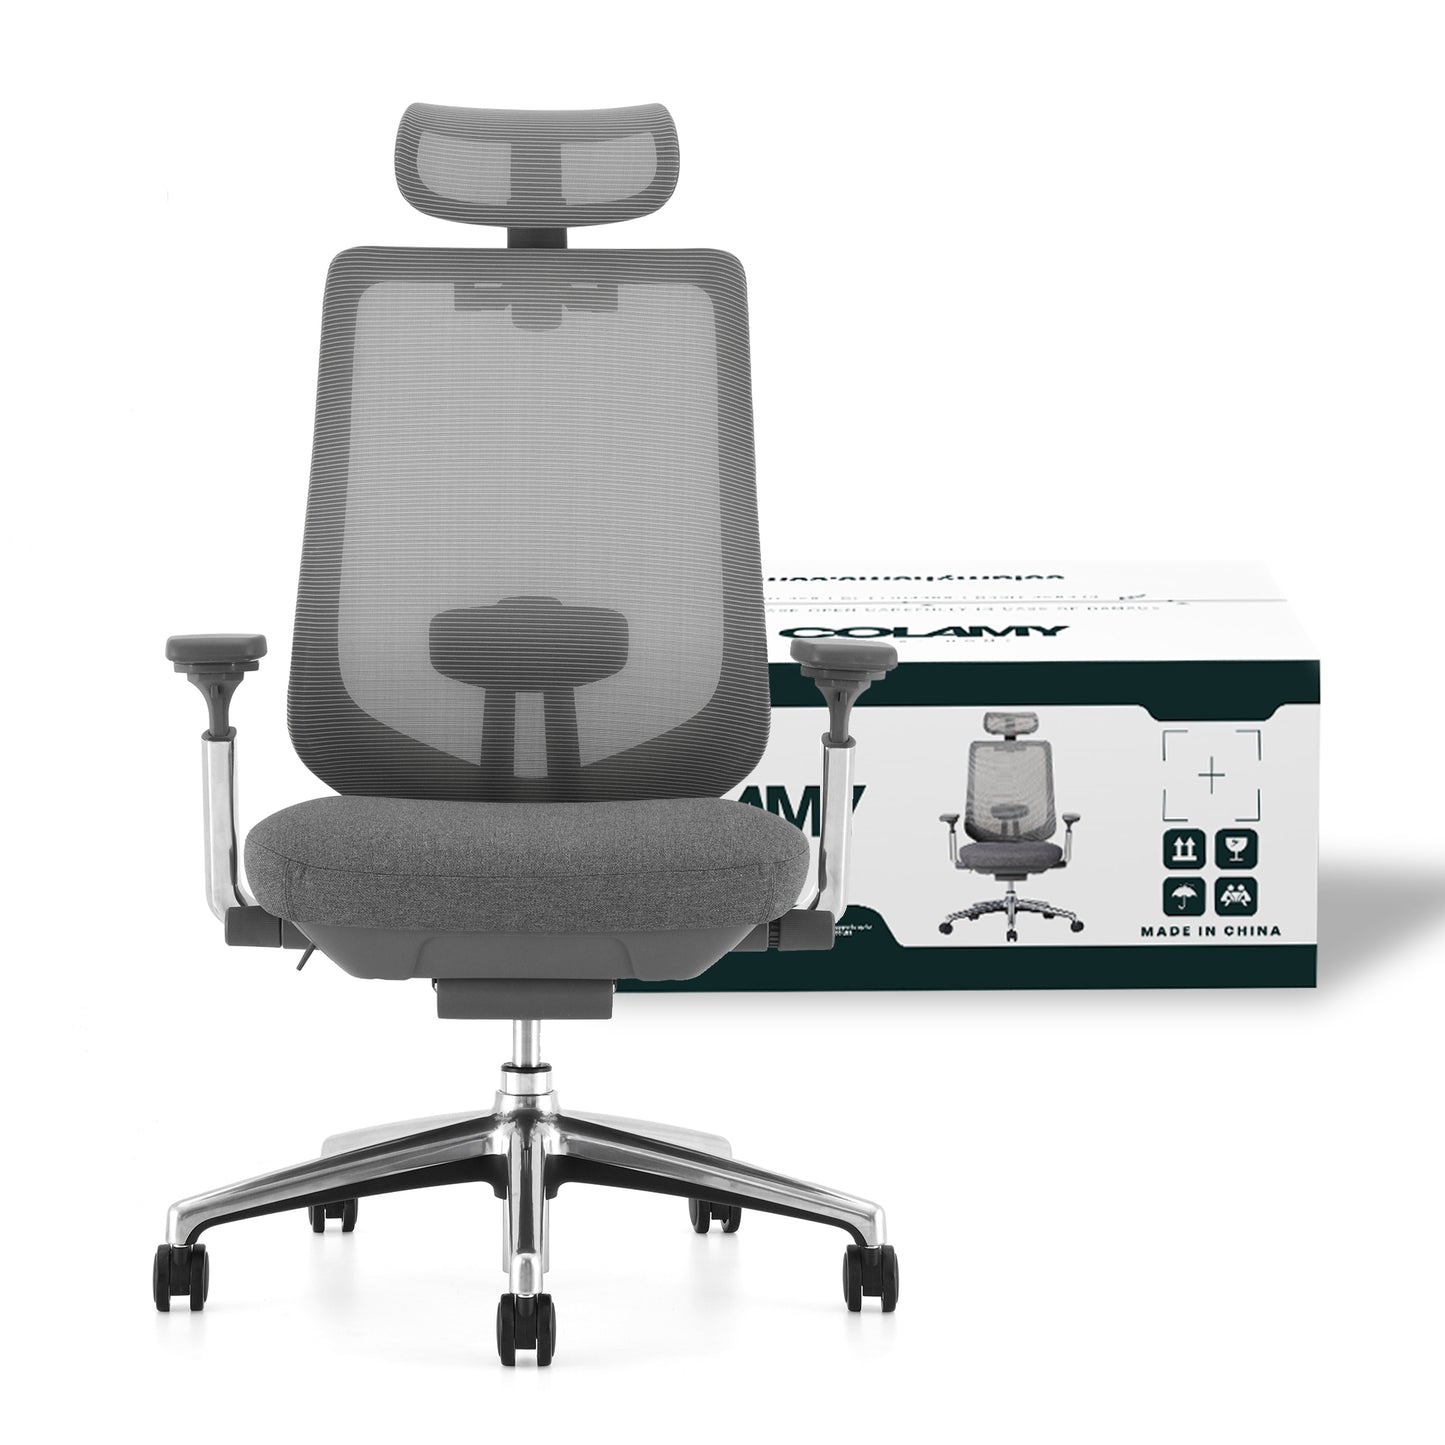 COLAMY ATLAS Ergonomic Mesh Back Office Chair with Slide Seat